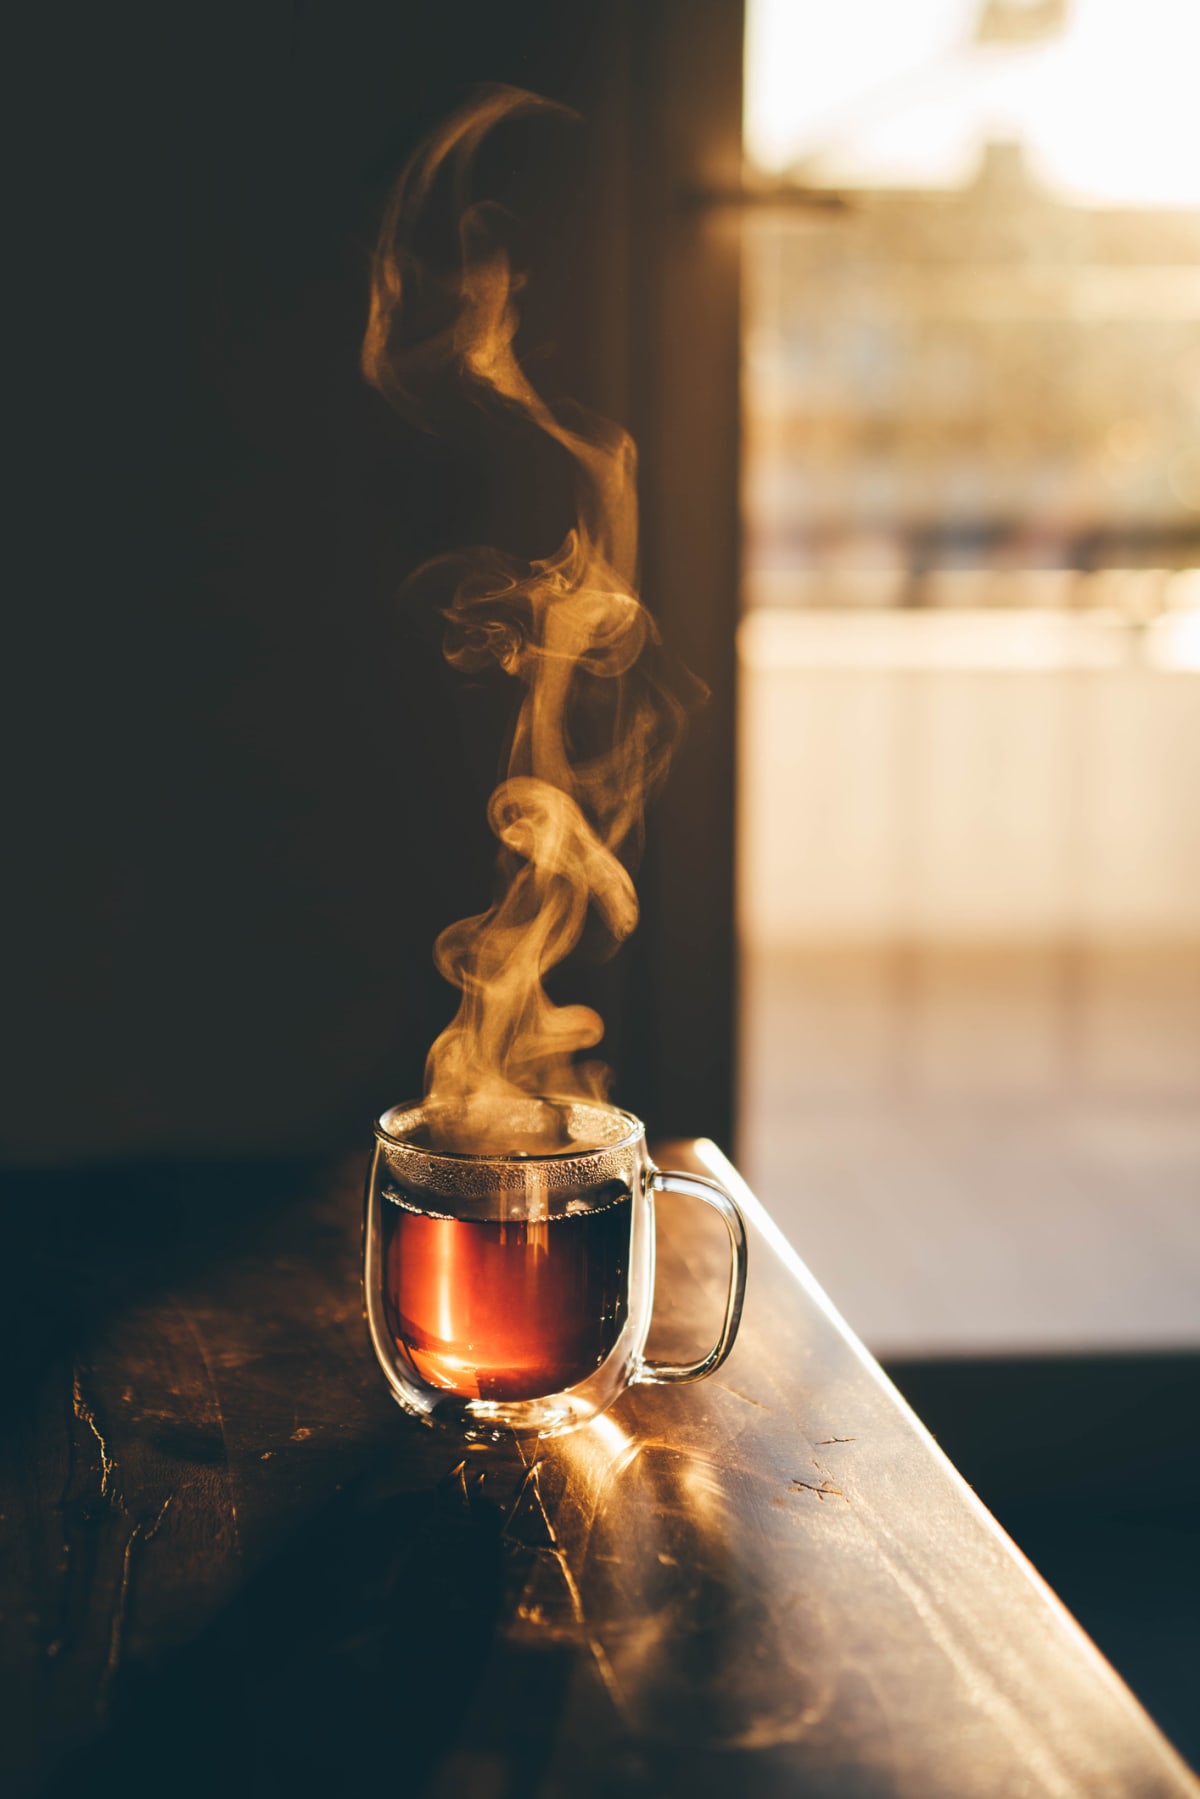 Steaming cup of tea on table